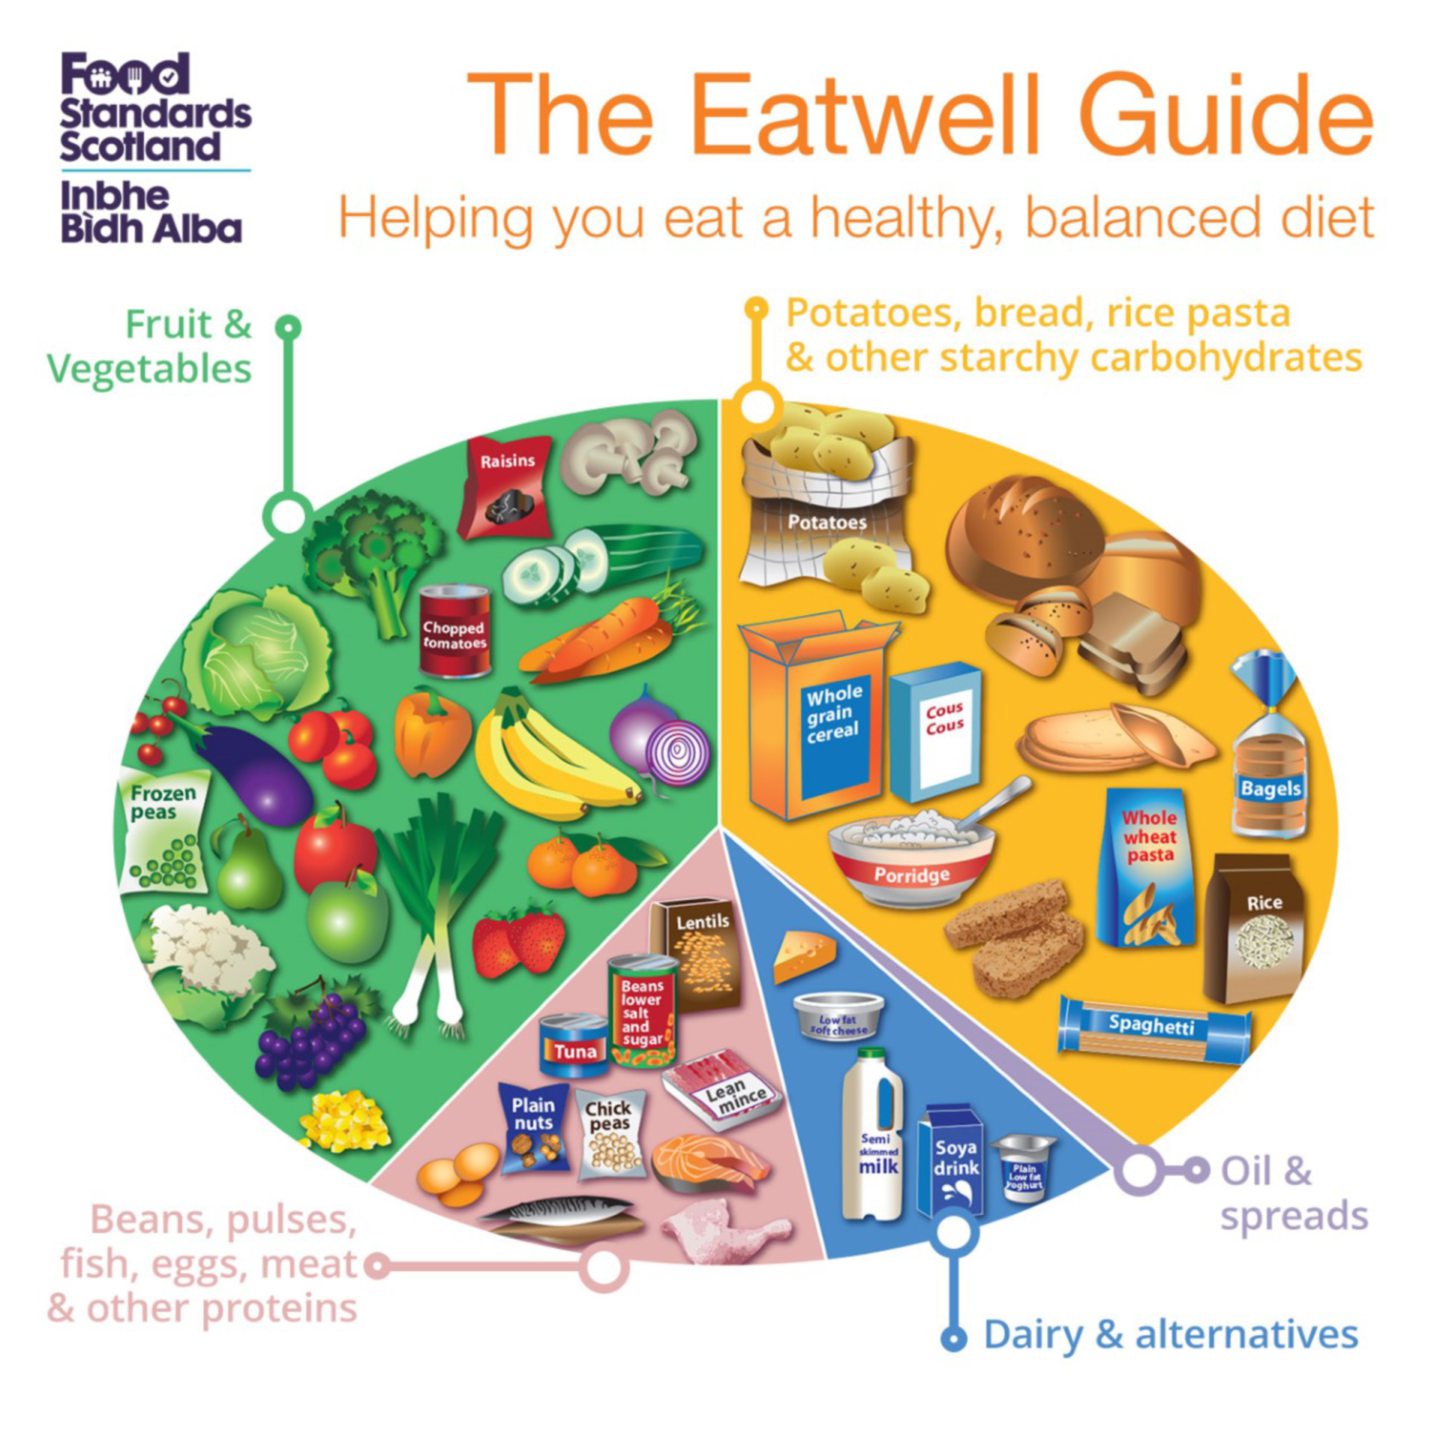 The Eatwell Guide. Adjusting your diet could help global efforts to combat climate change.